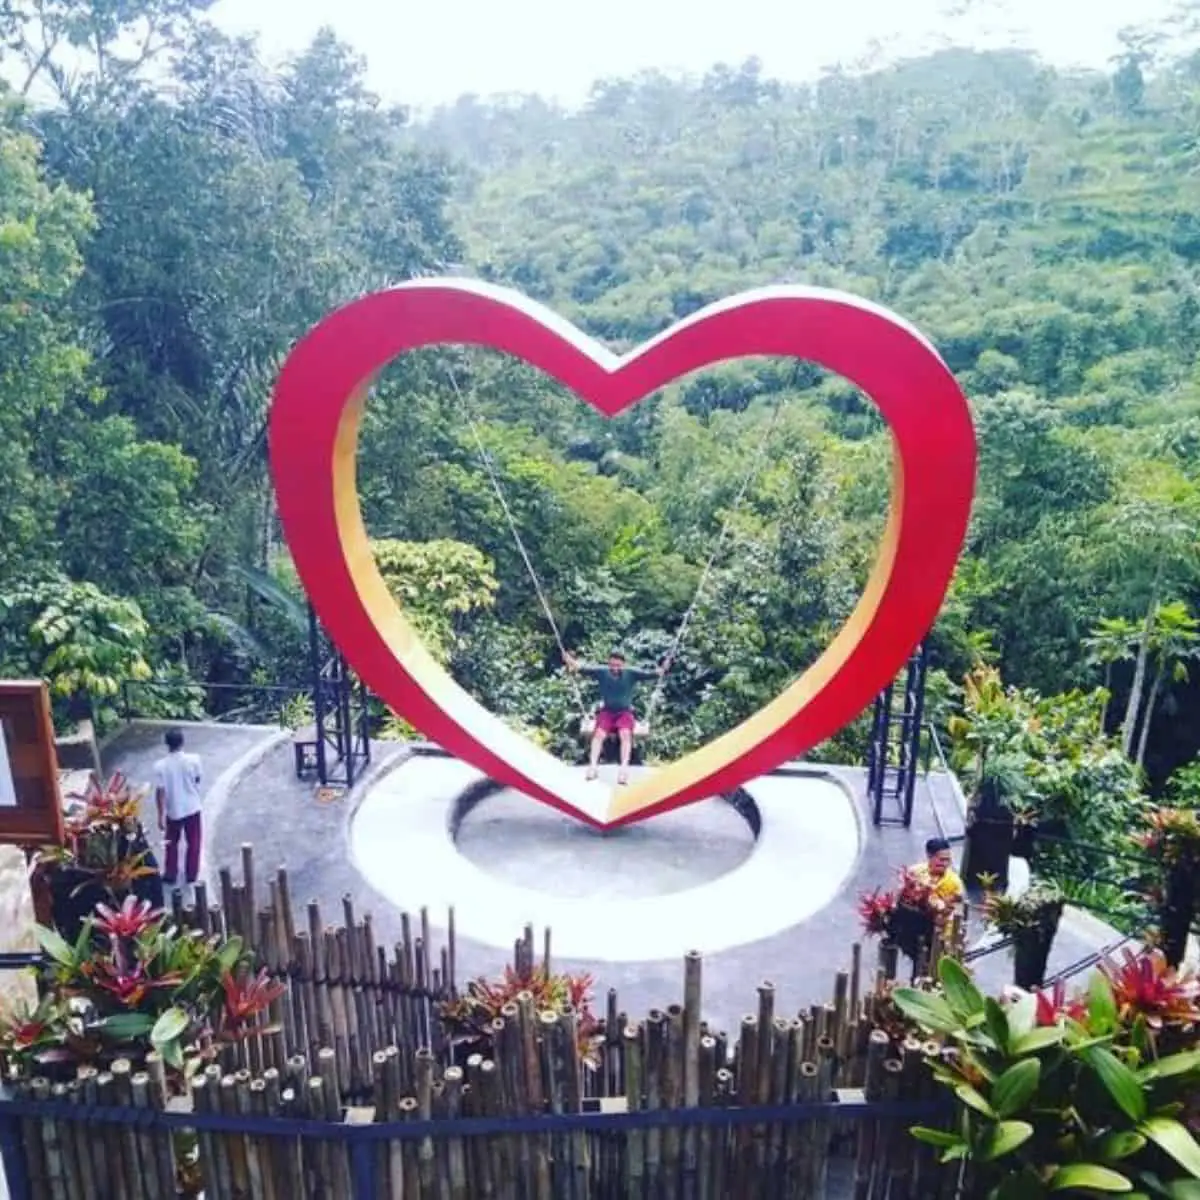 Bas De Atayana’s heart shaped swing with a forest background